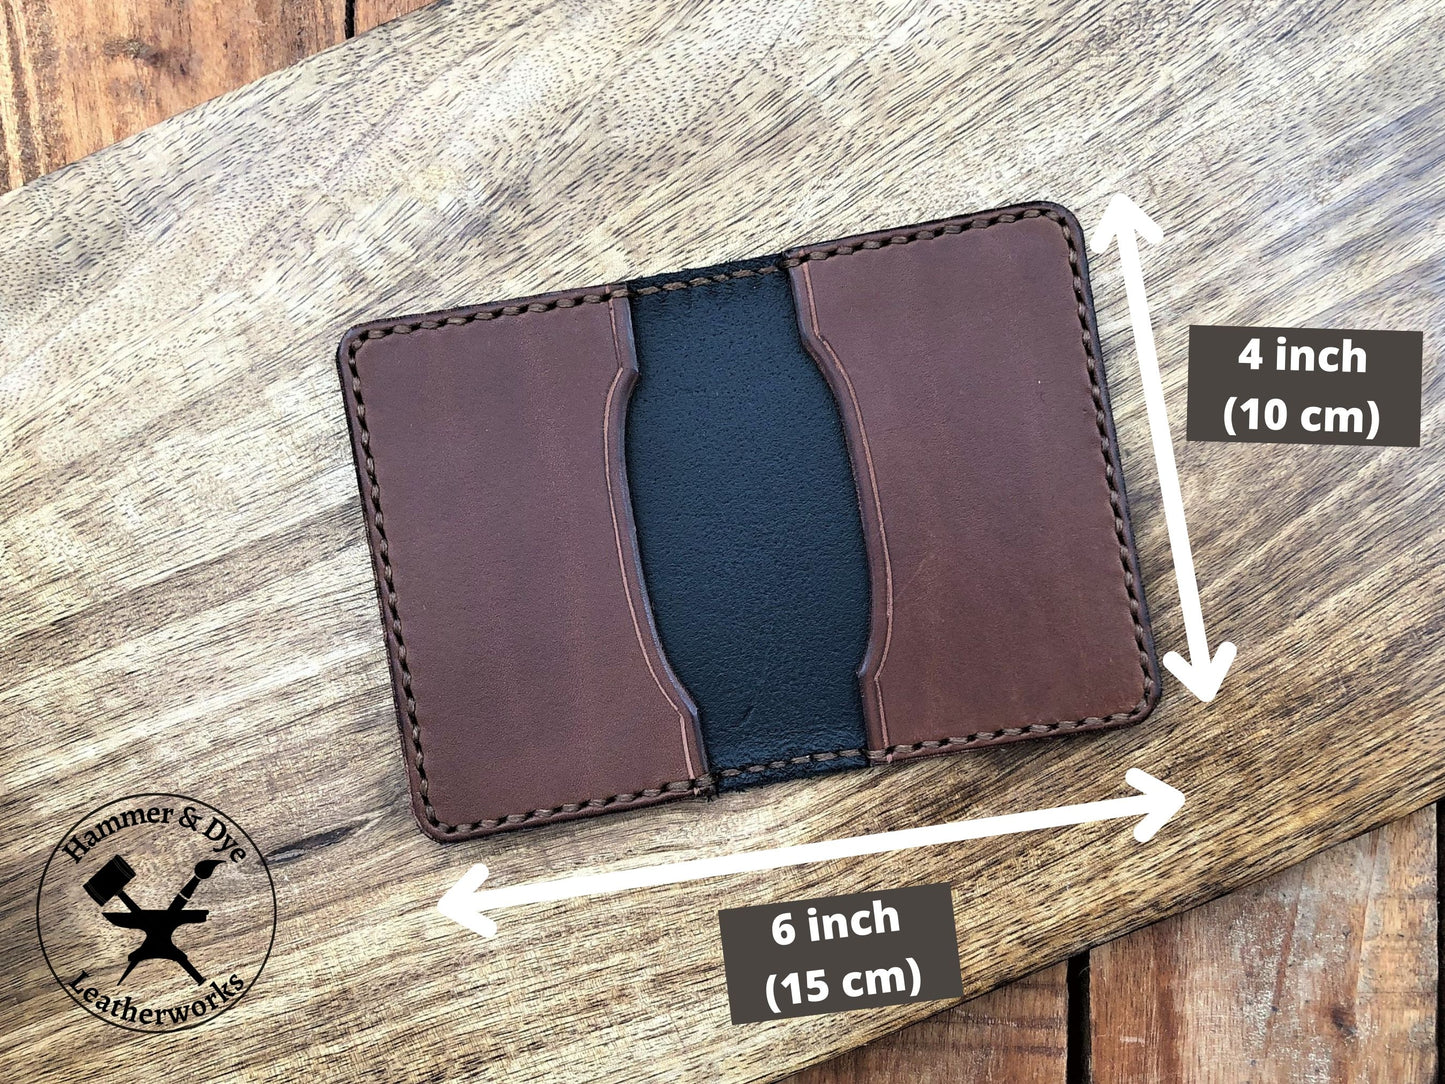 Handmade Two-tone Bifold Leather Card Wallet in Black and Brown with brown stitching with sizing guide